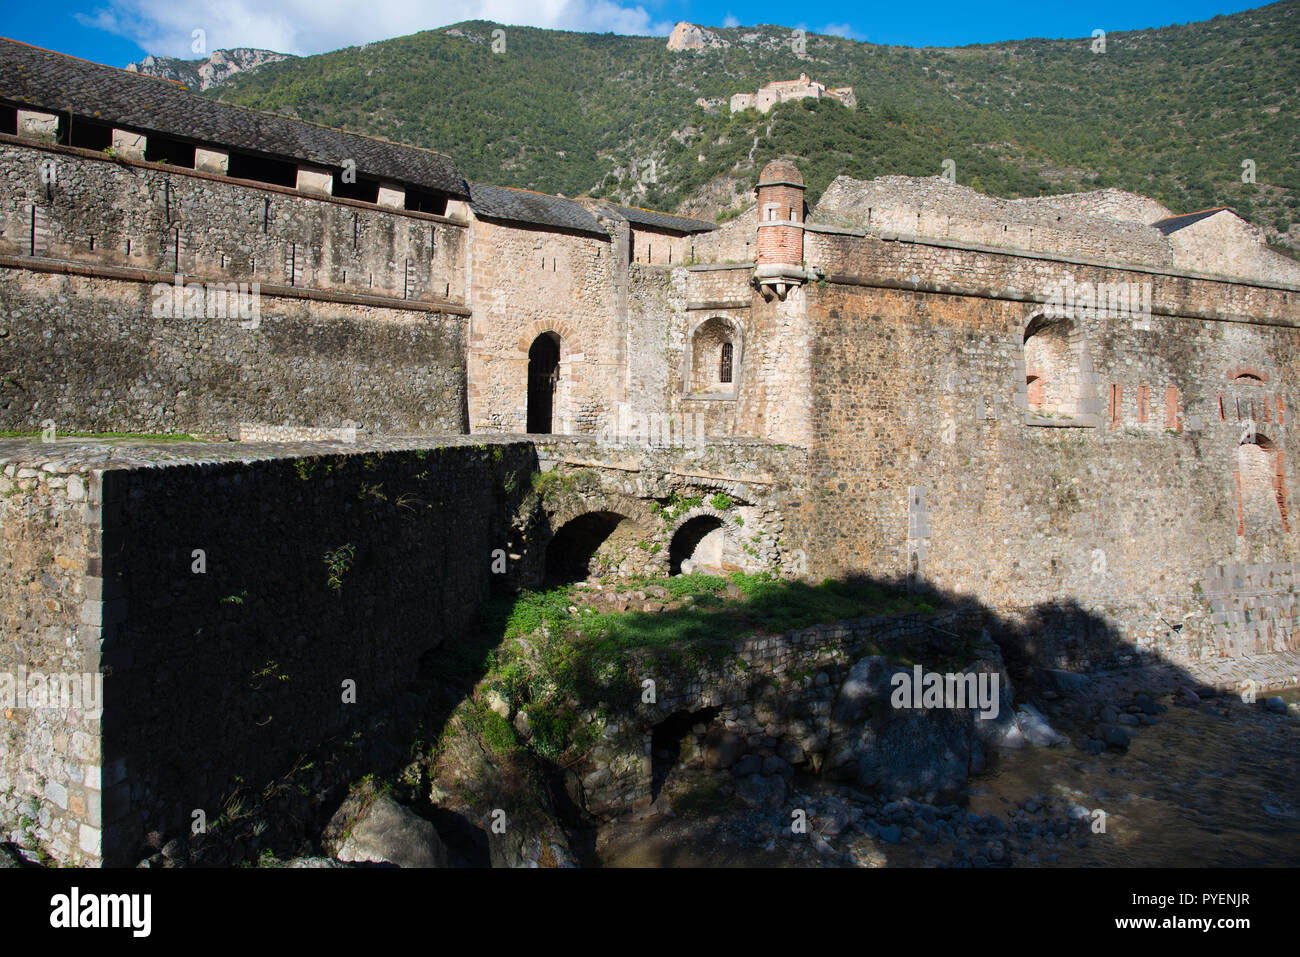 Medieval city Villefranche de Conflent in the Pyrenees mountains in France Stock Photo